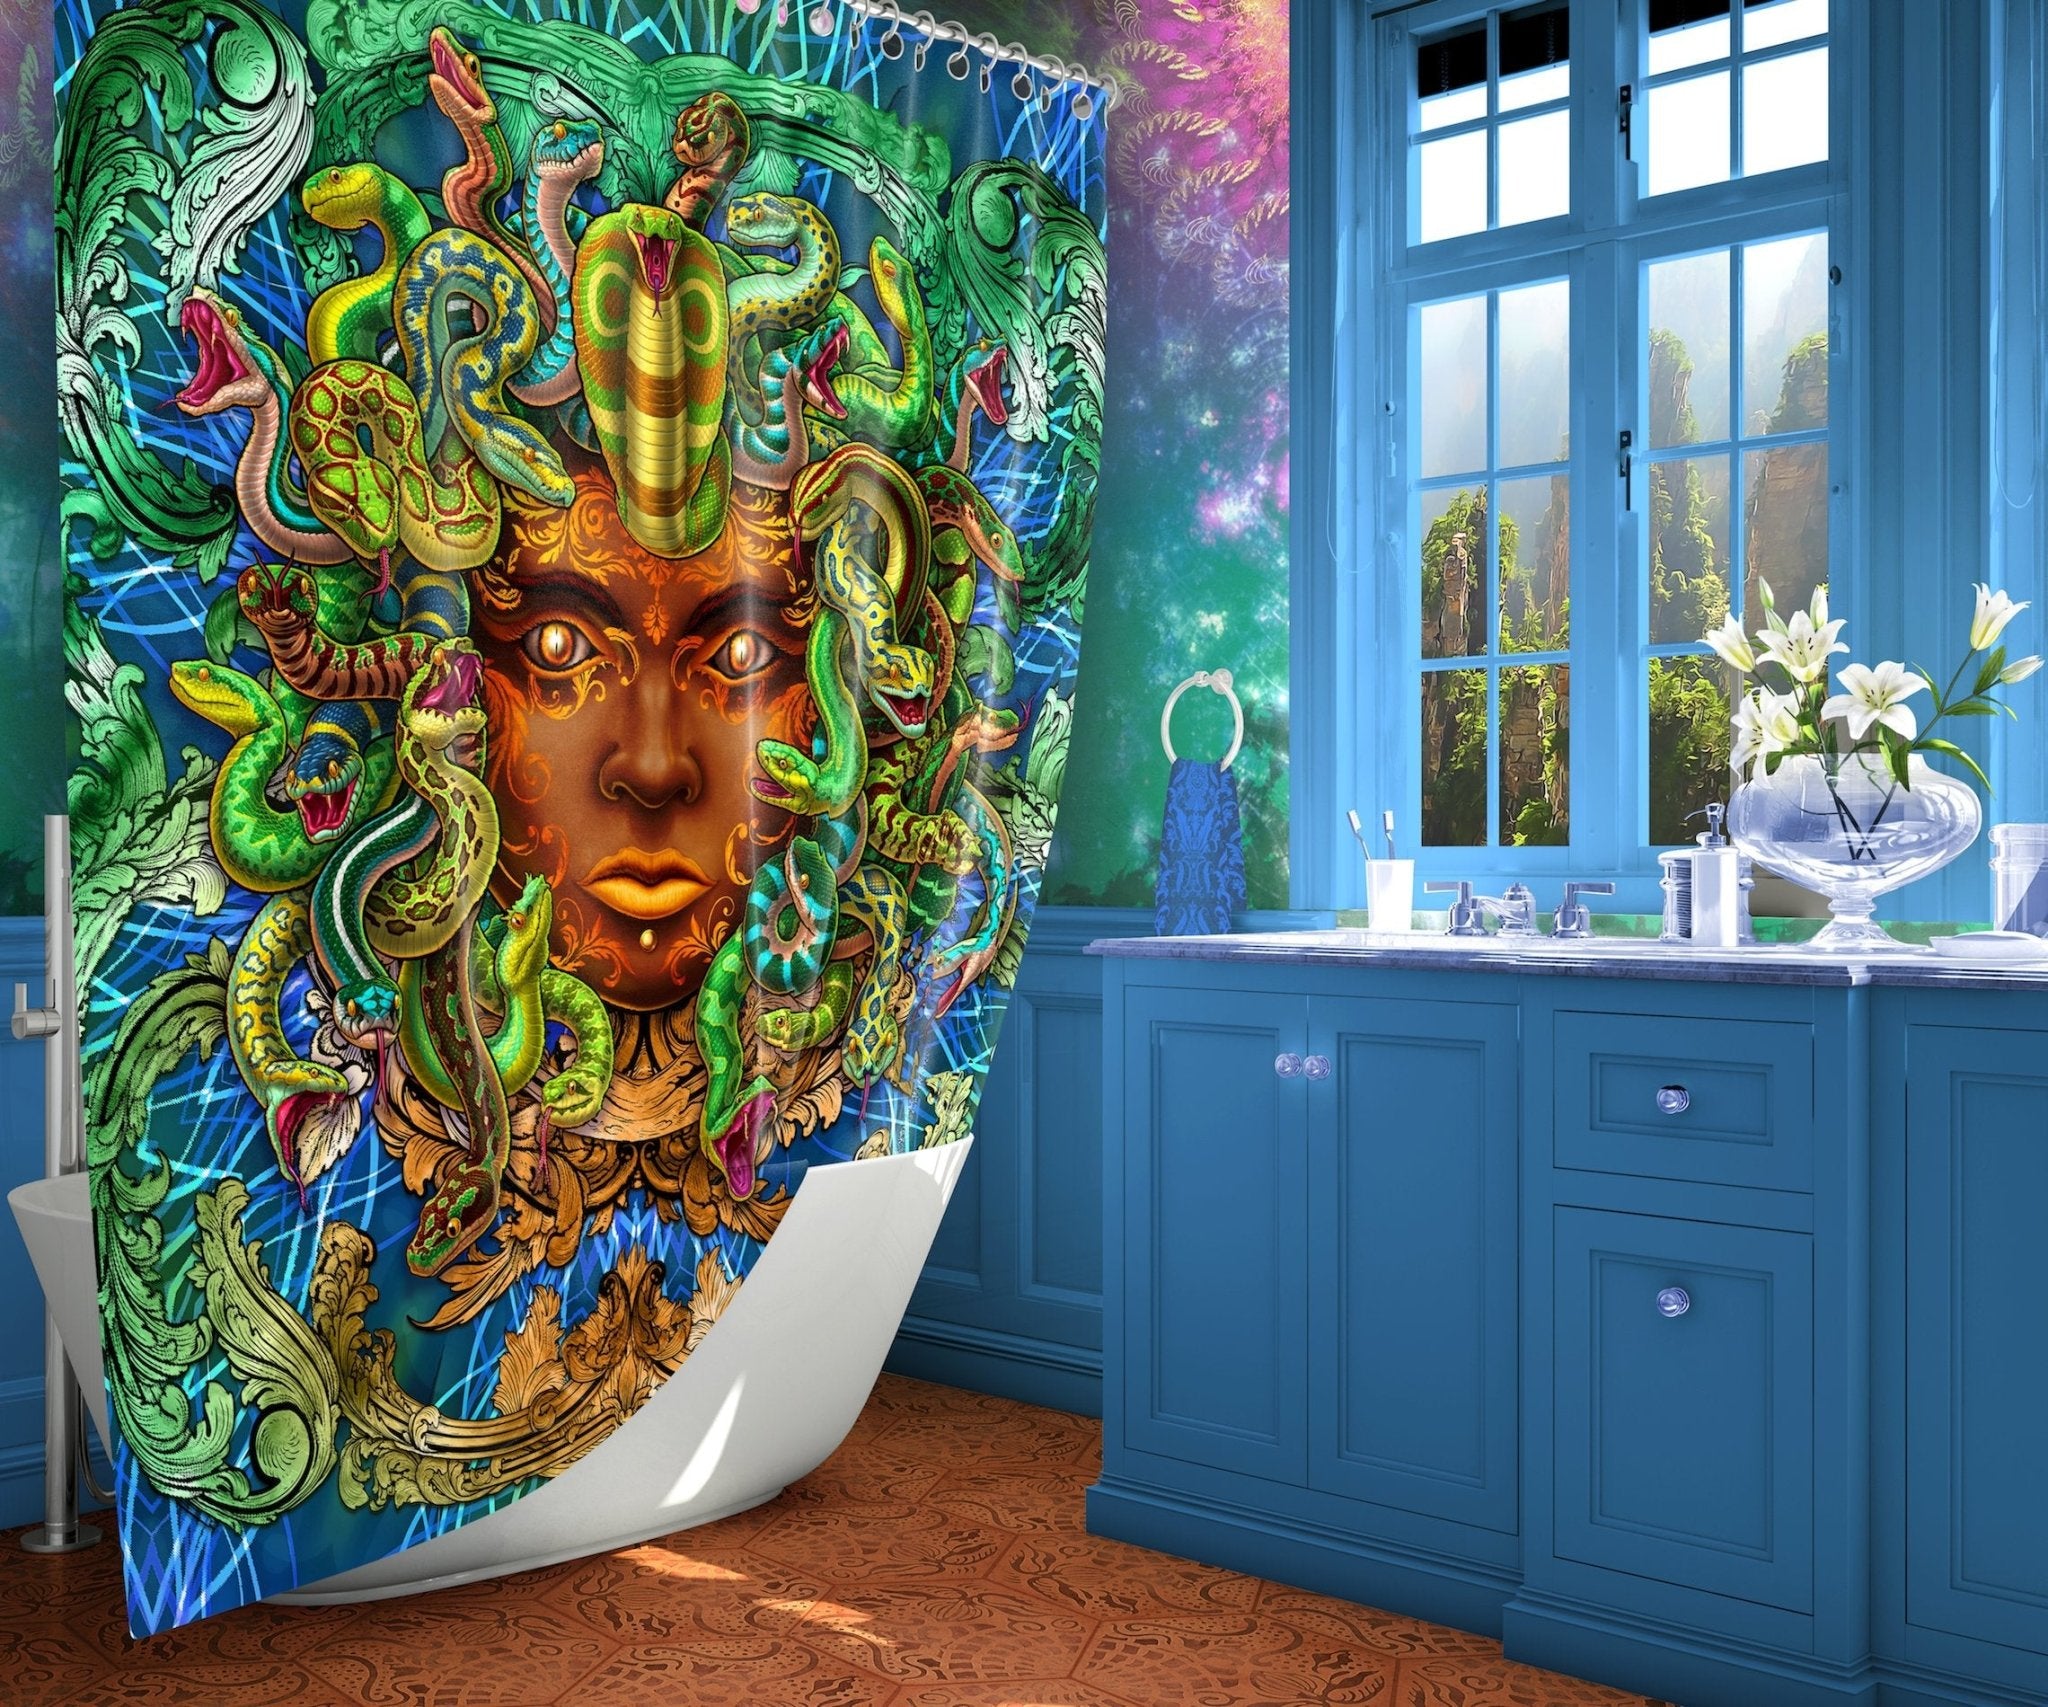 Medusa Shower Curtain, Boho and Indie Bathroom Decor, Witchy Art, Pagan Goddess - Nature, Green Snakes - Abysm Internal